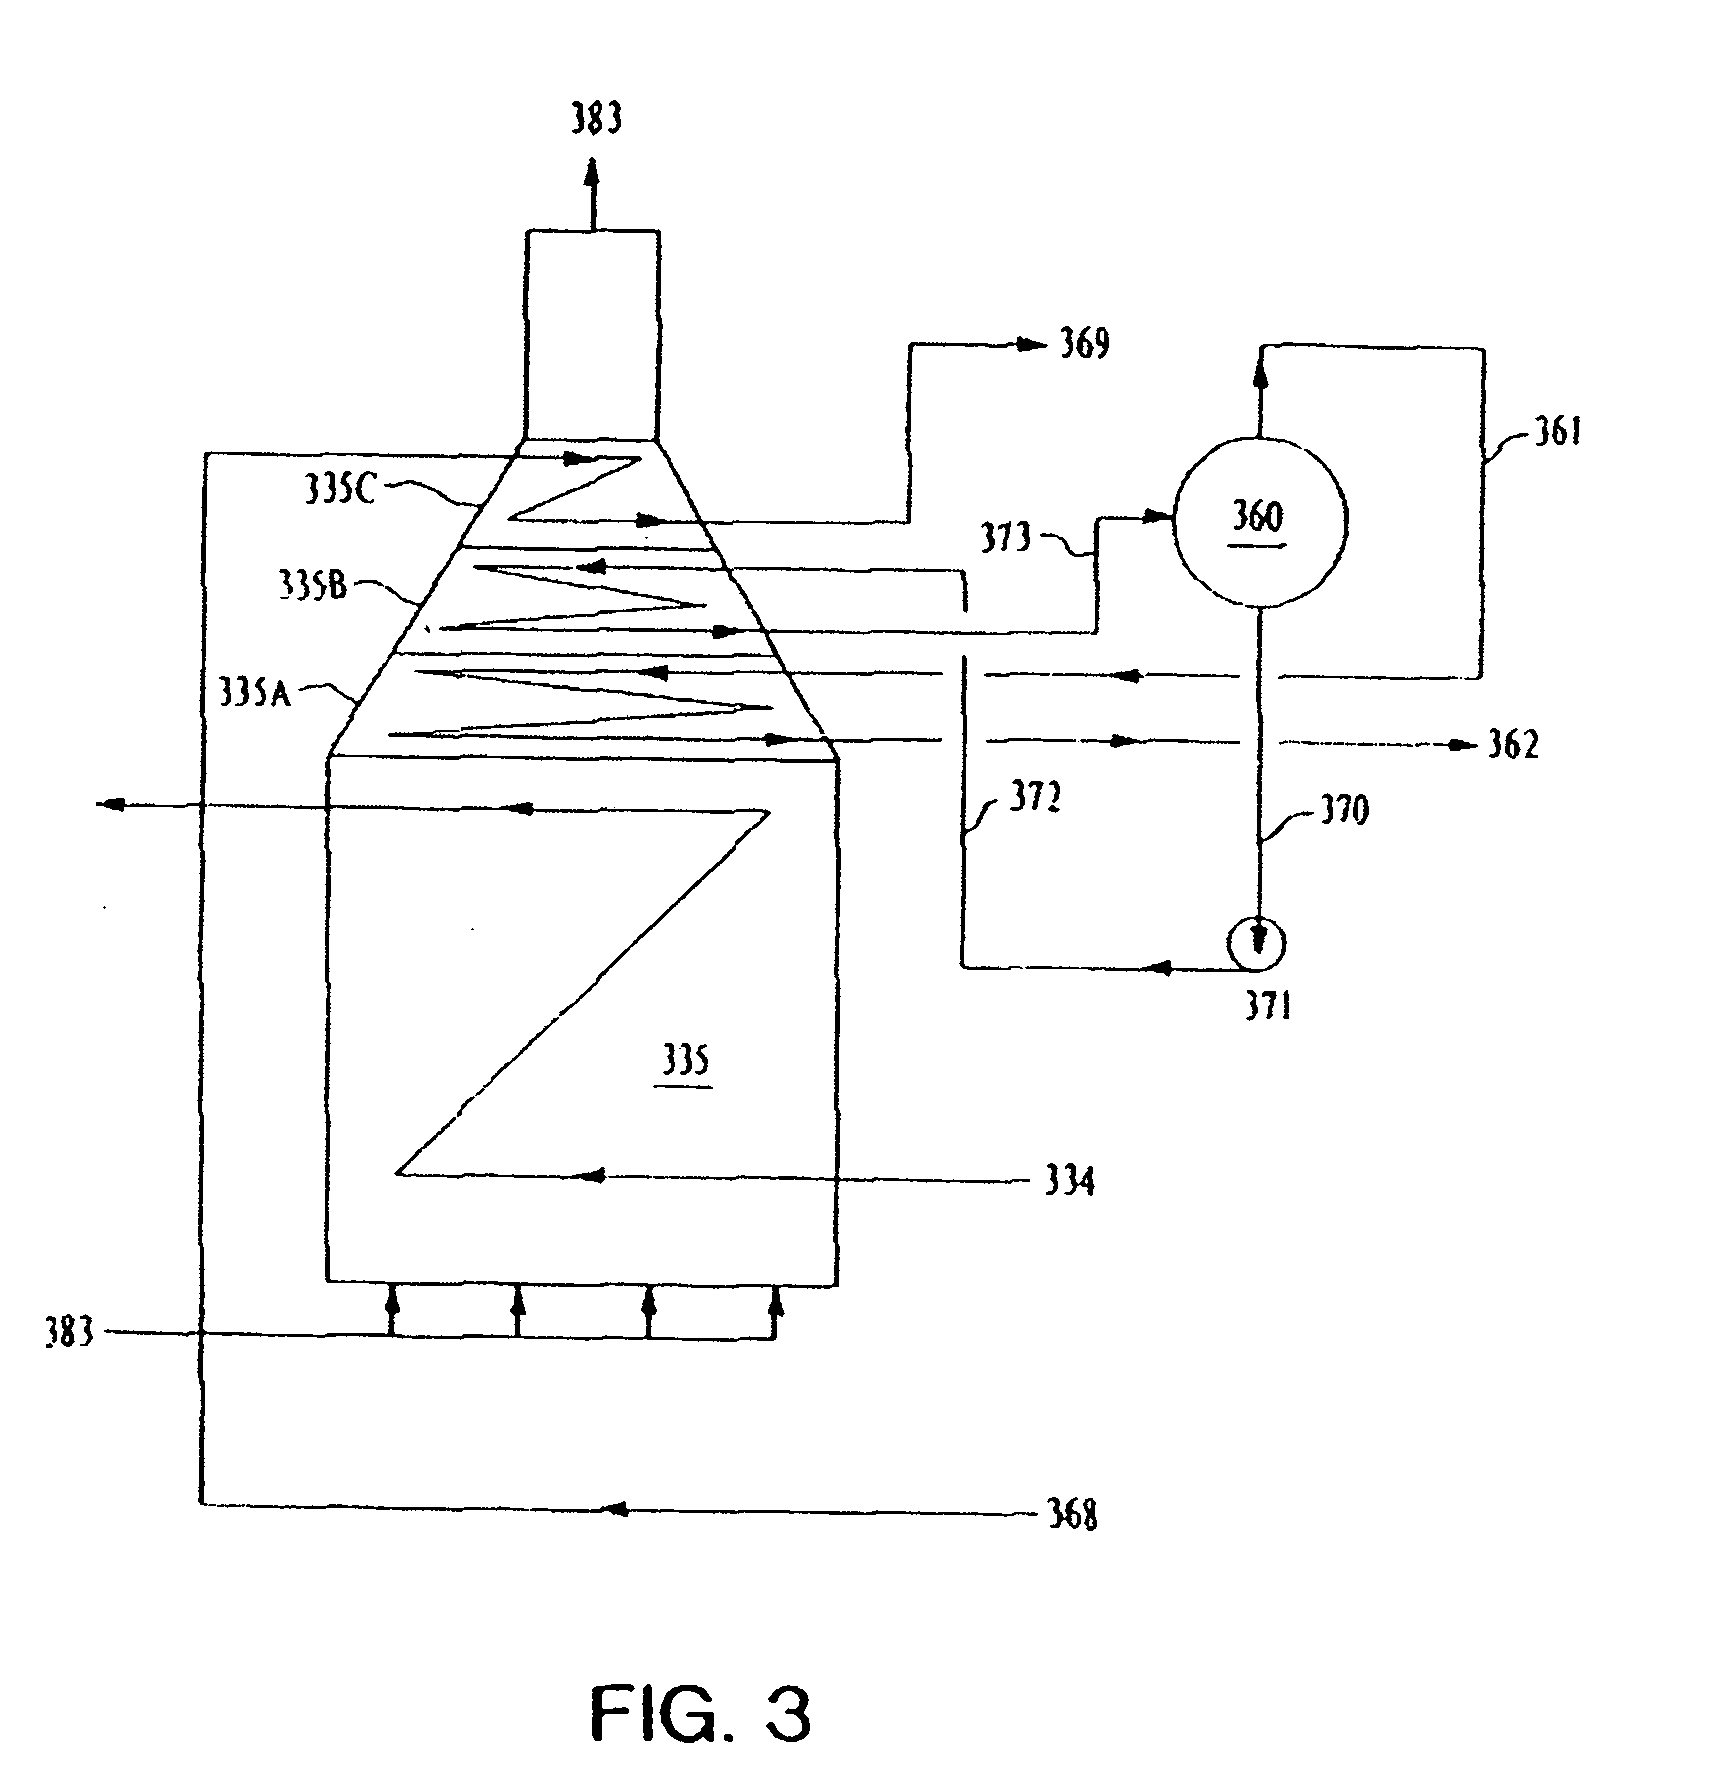 Process and apparatus for converting oil shale or oil sand (tar sand) to oil